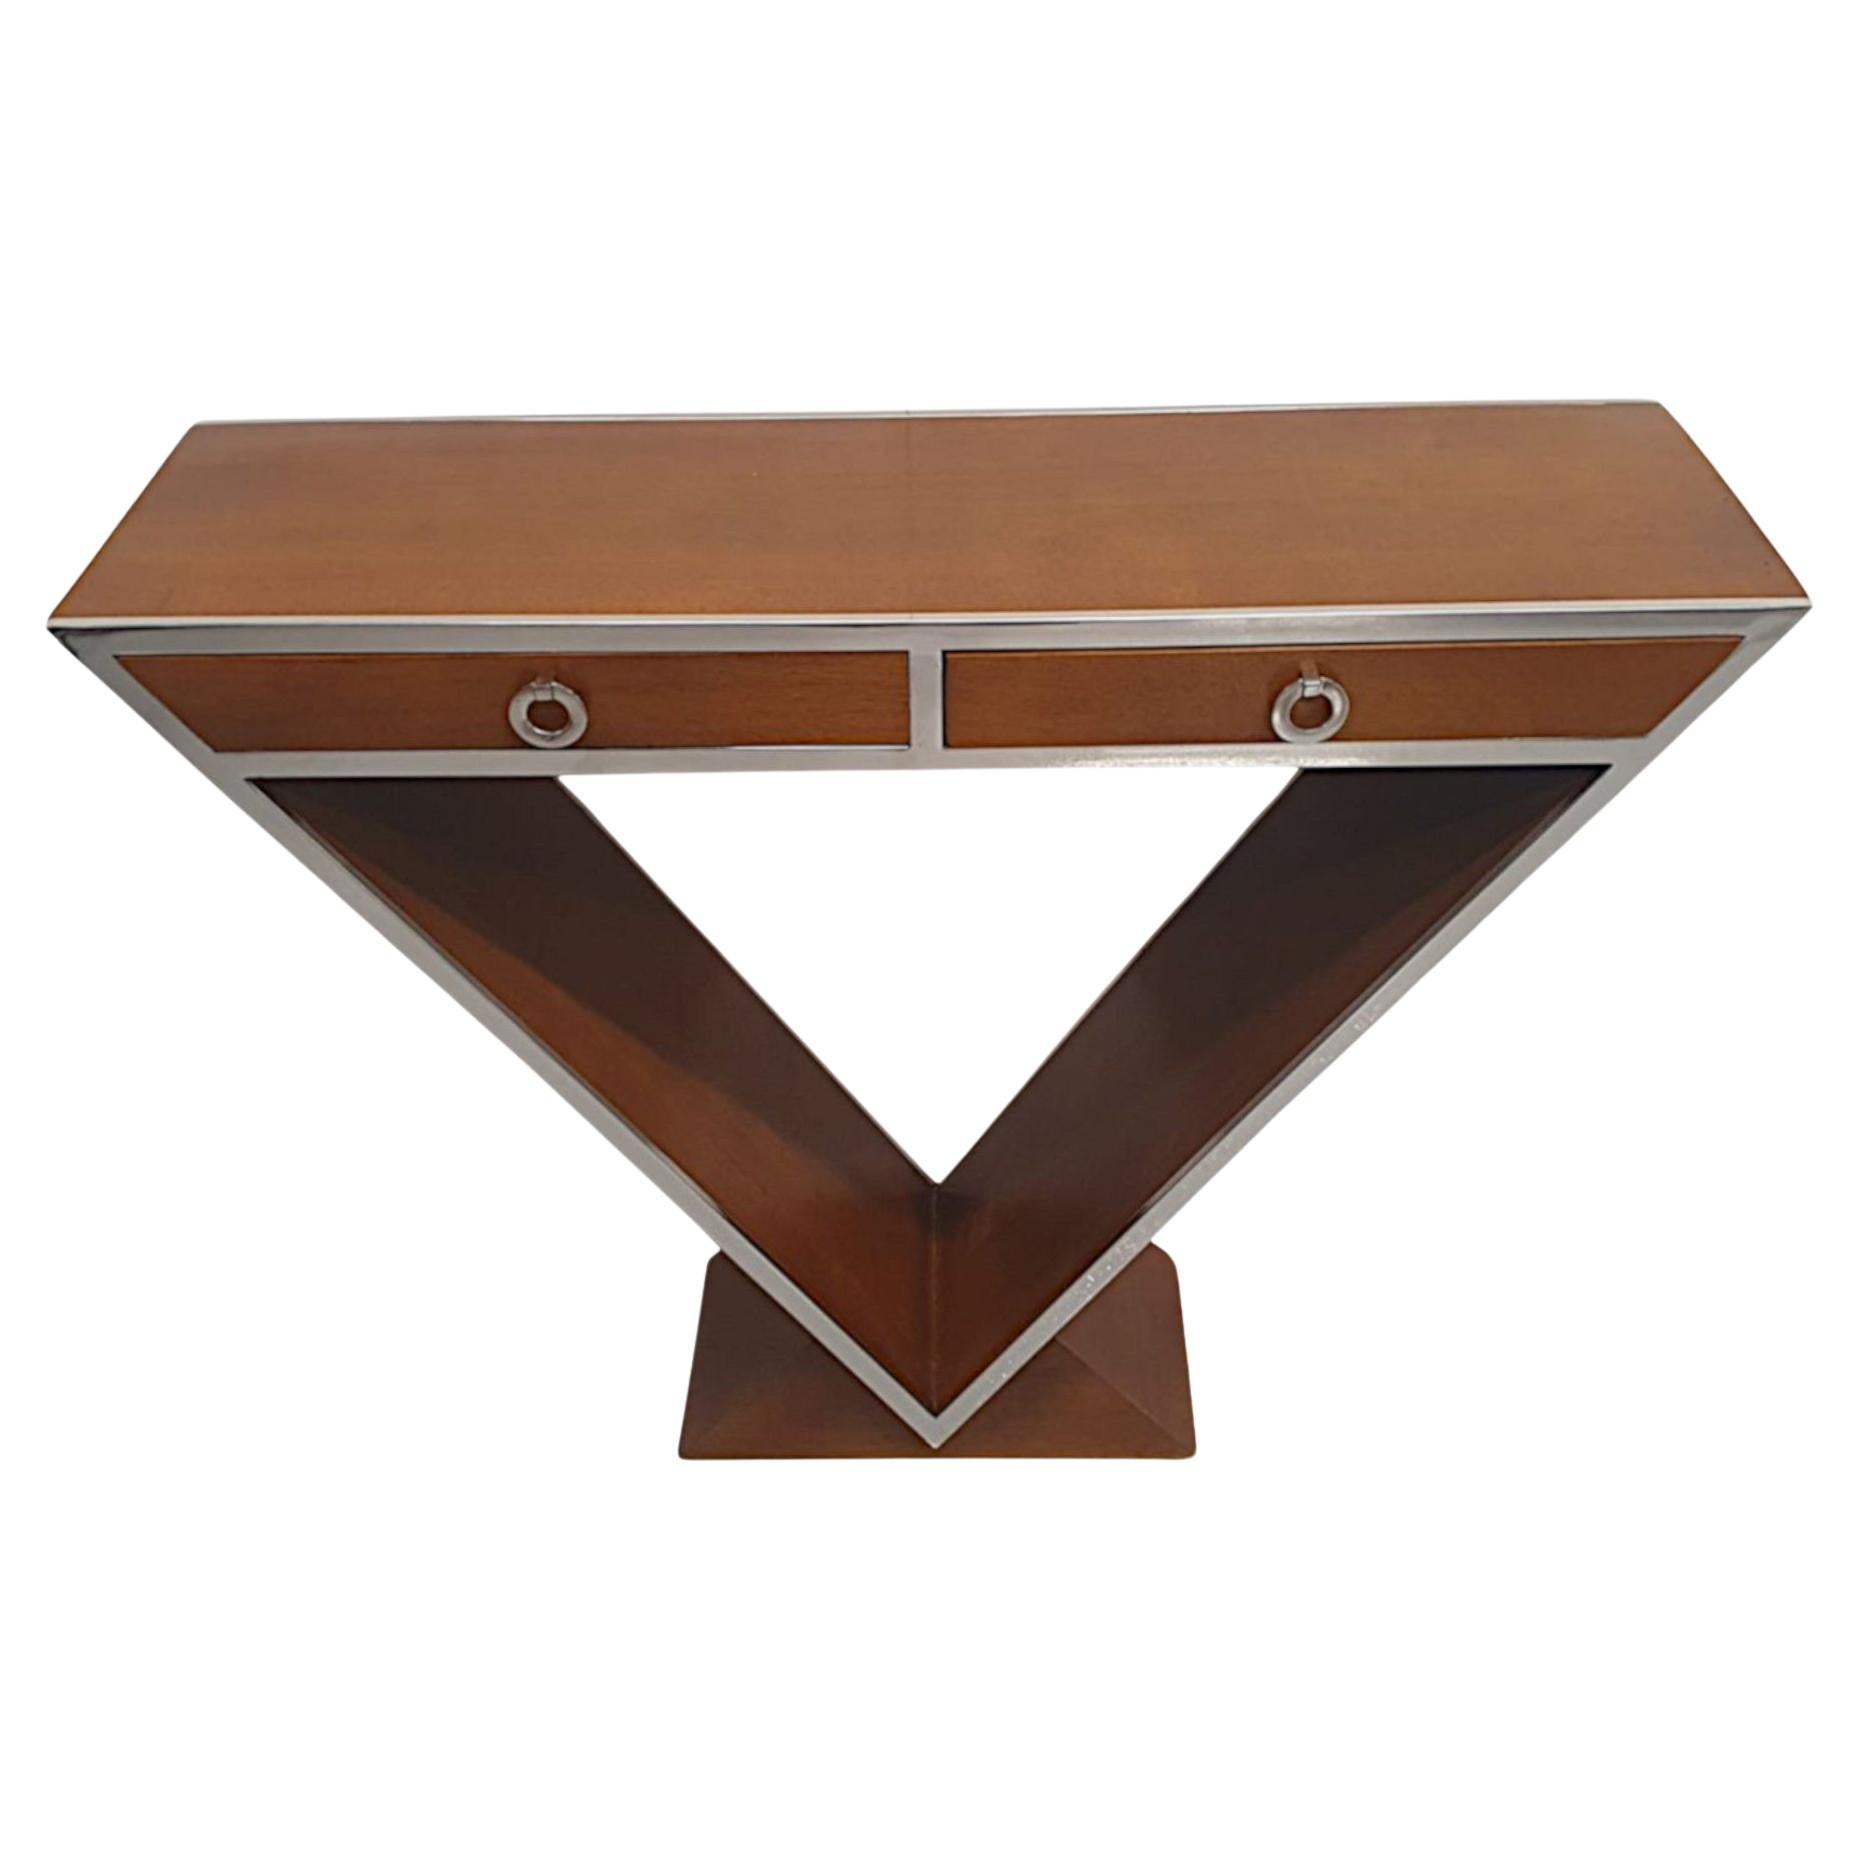 A Fabulous Art Deco Design Cherrywood and Chrome Console or Side Table For Sale